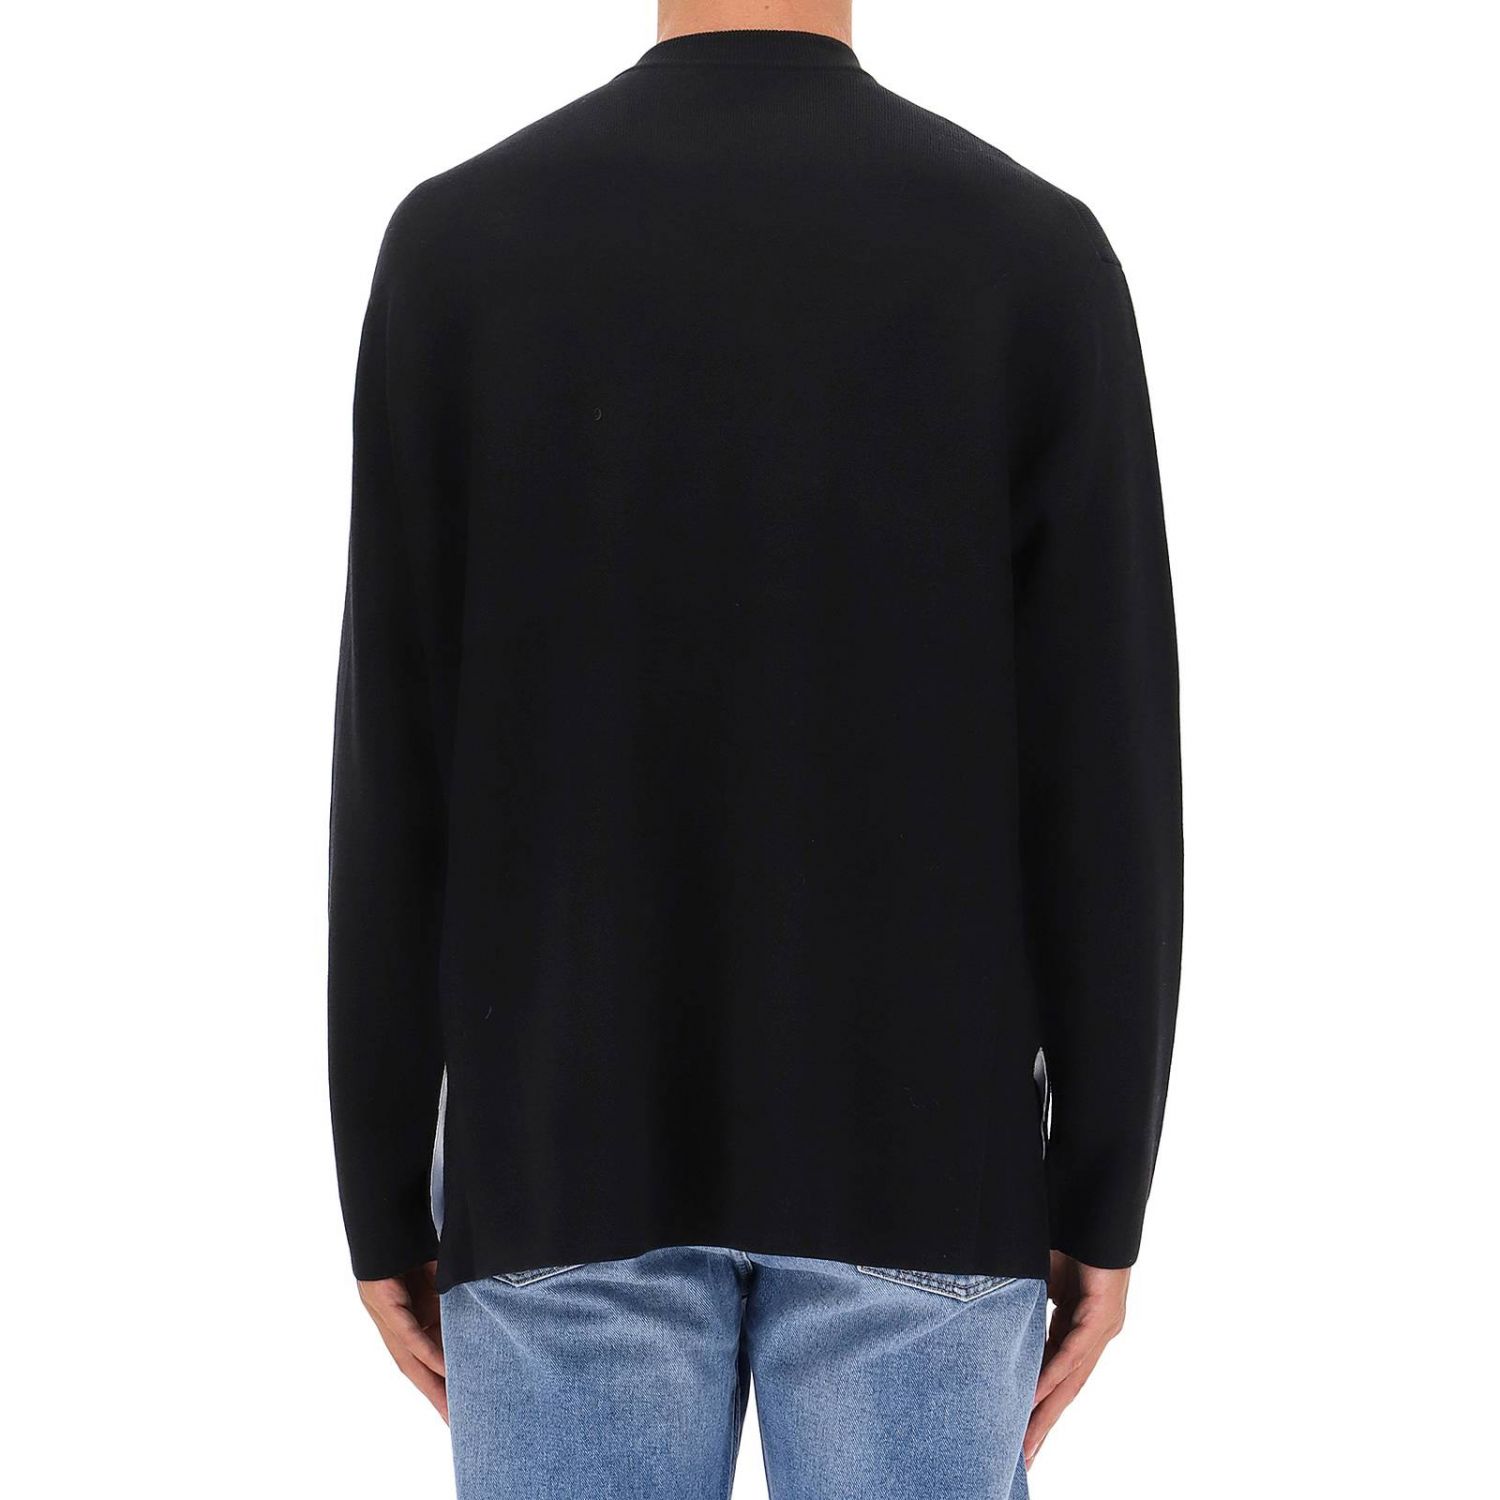 Acne Studios Outlet: sweater for man - Black | Acne Studios sweater ...